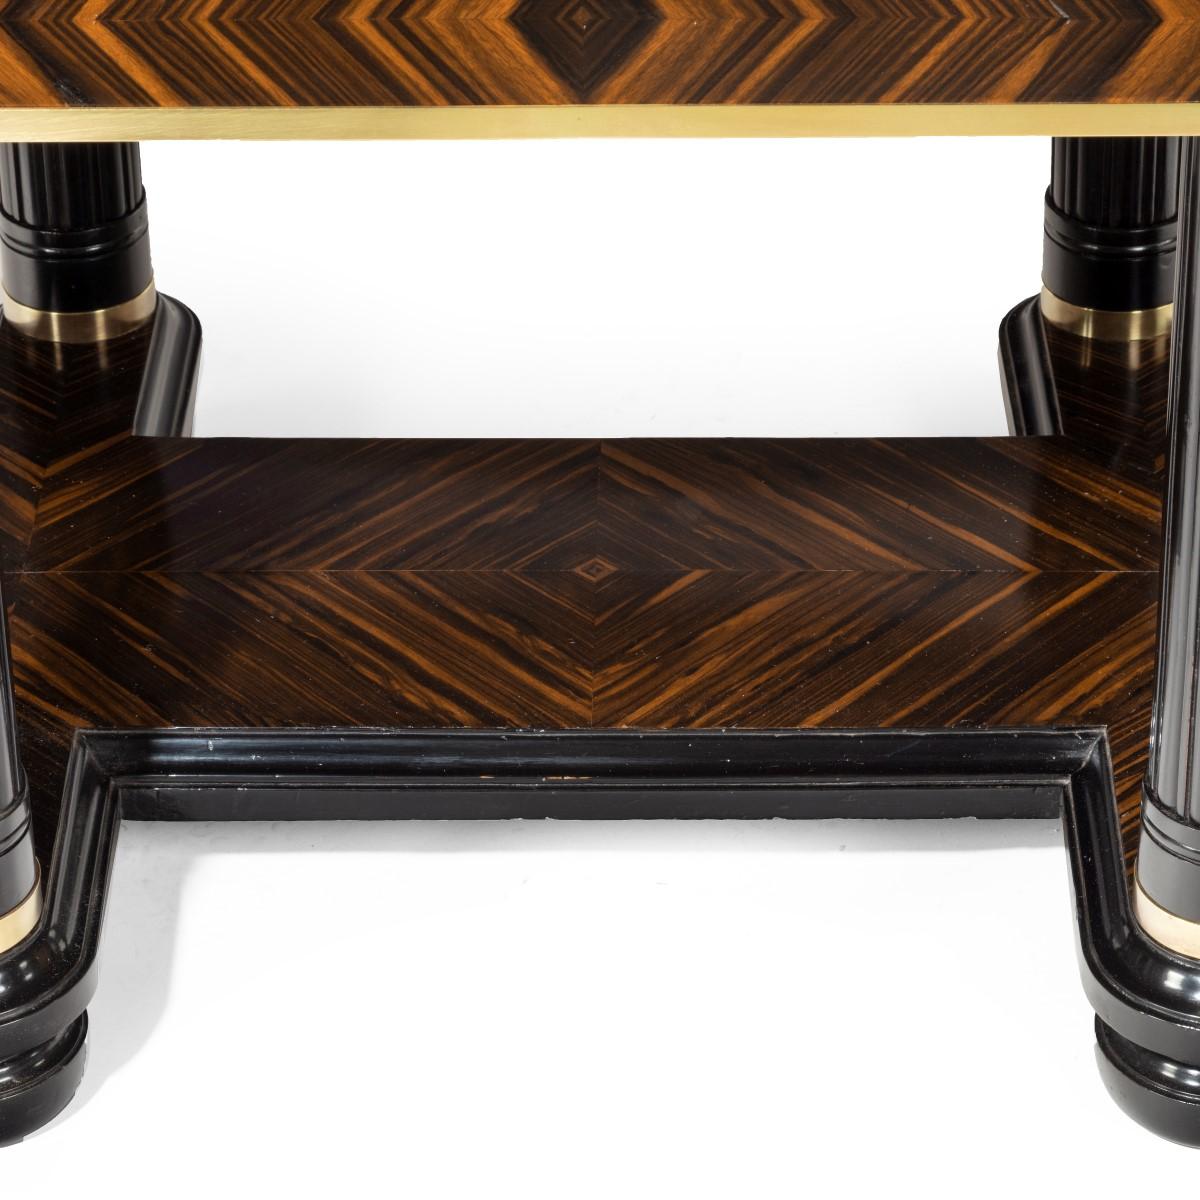 A stylish Art Deco zebra wood centre or dining table